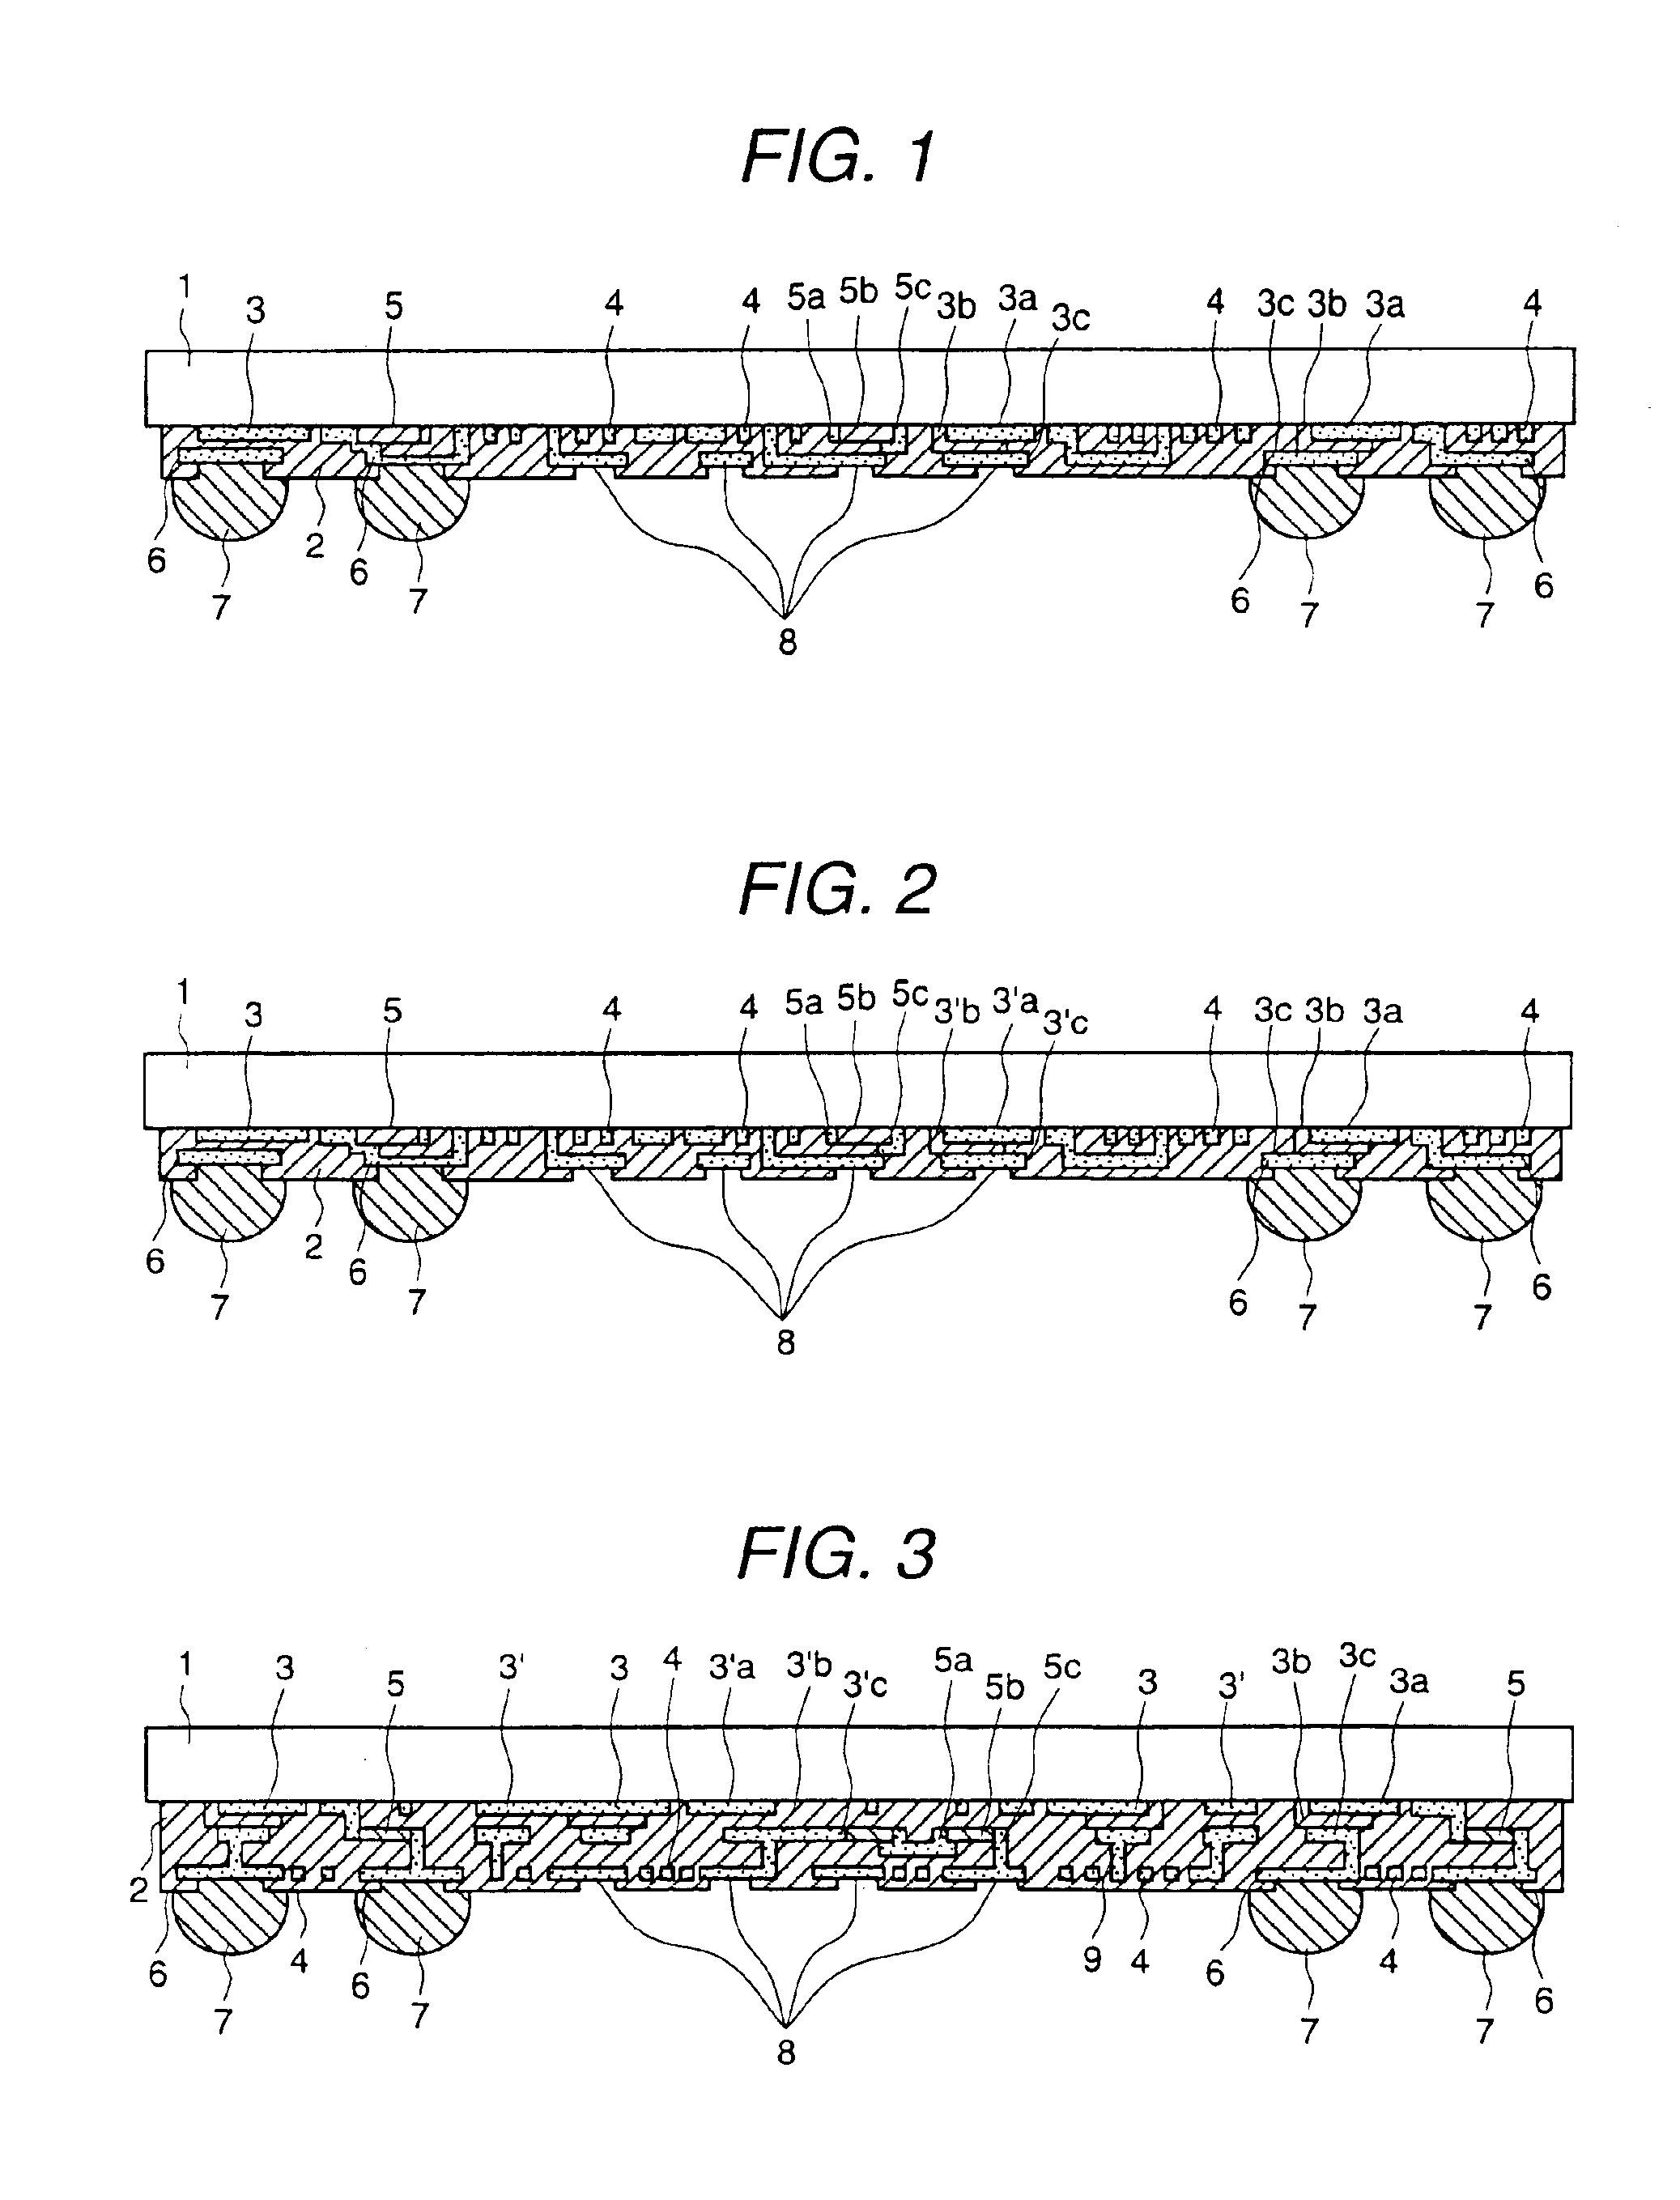 Semiconductor connection substrate